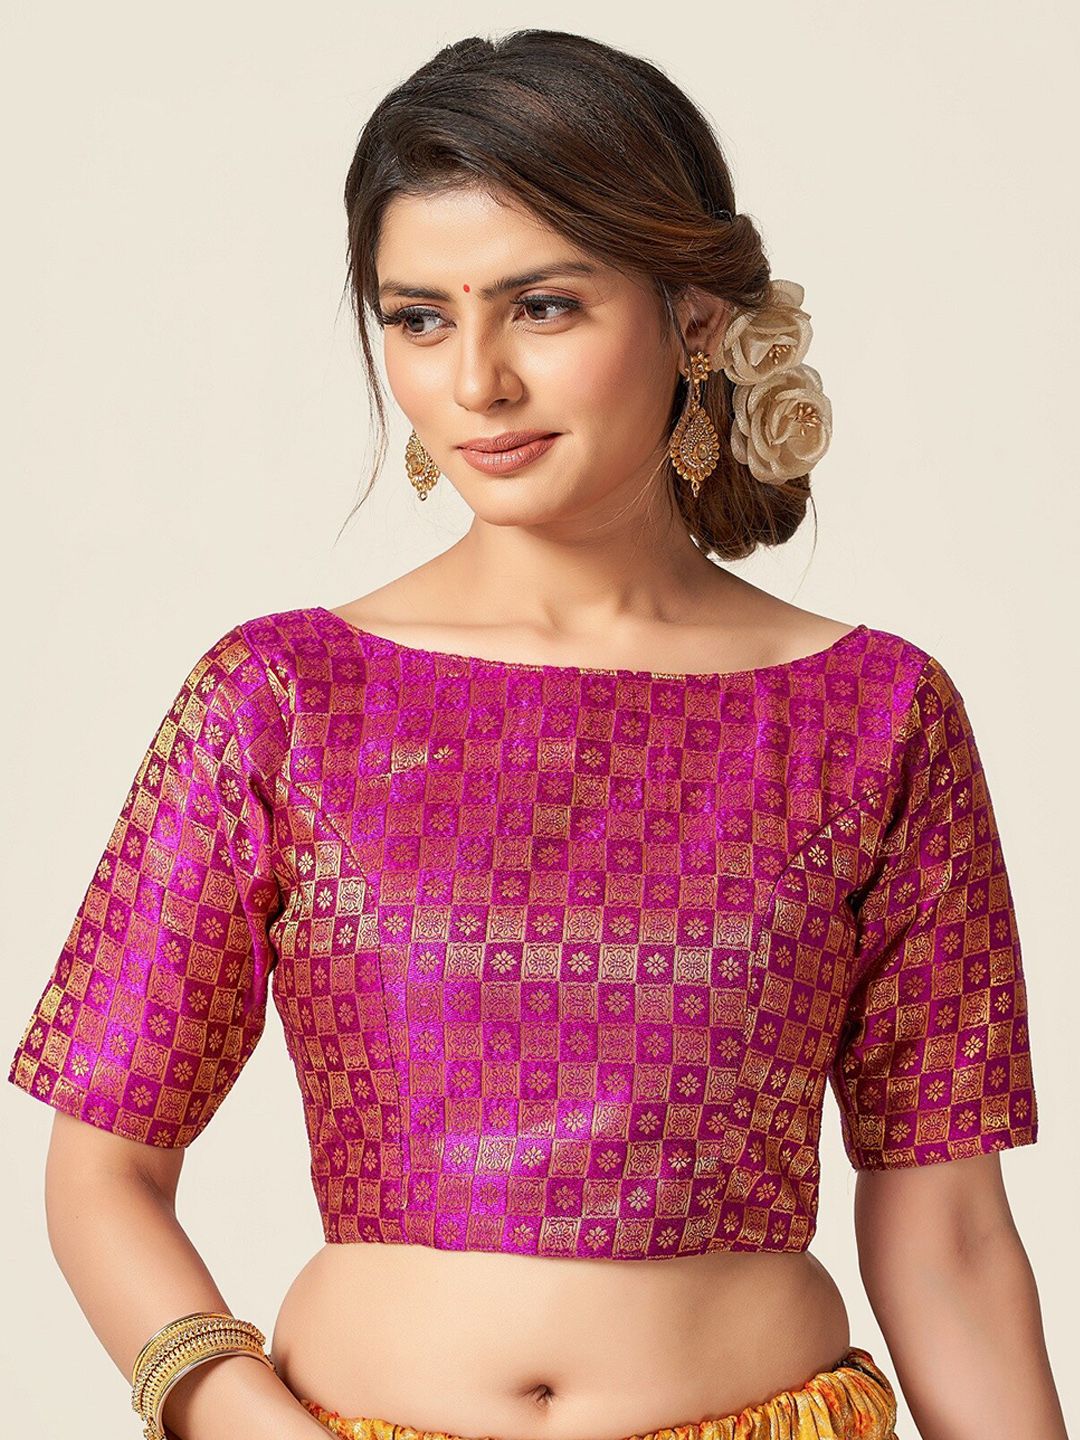 HIMRISE Pink Woven-Design  Brocade Saree Blouse Price in India